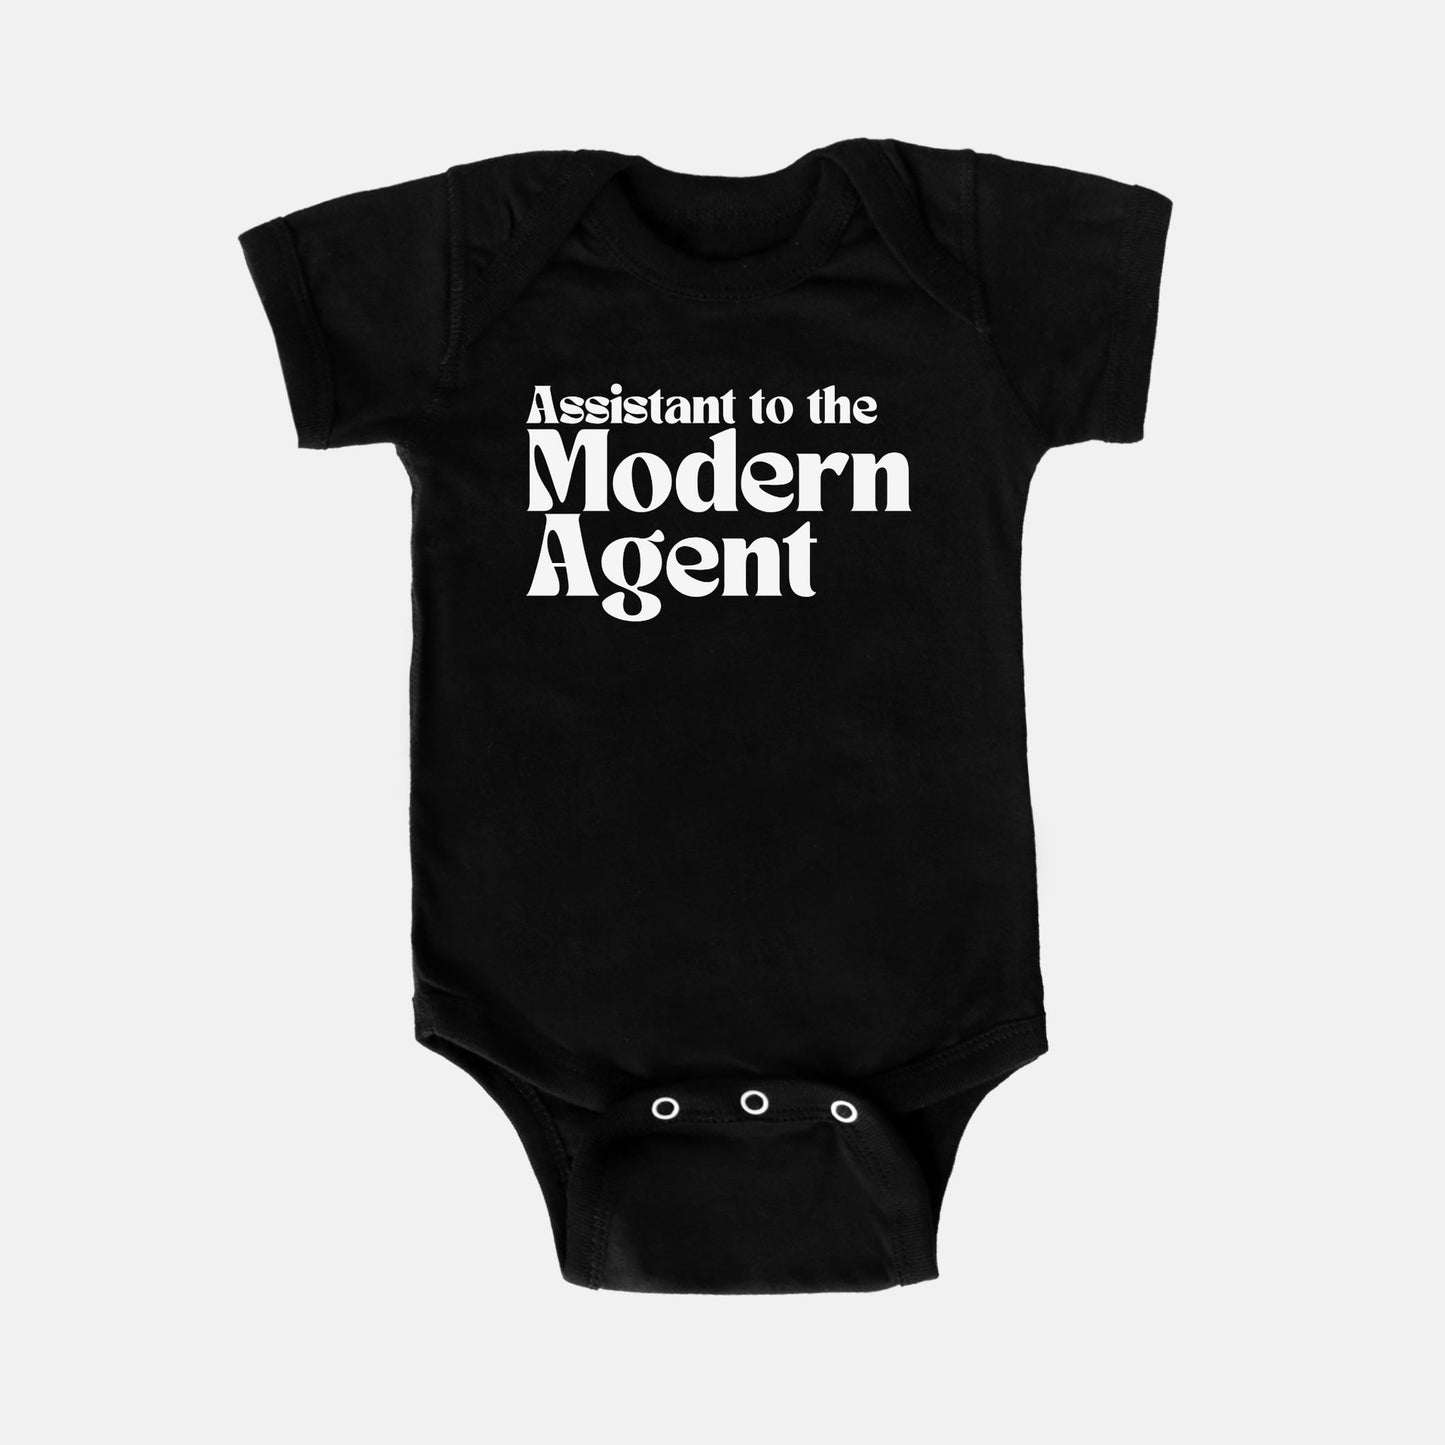 Assistant to the Modern Agent Infant Bodysuit